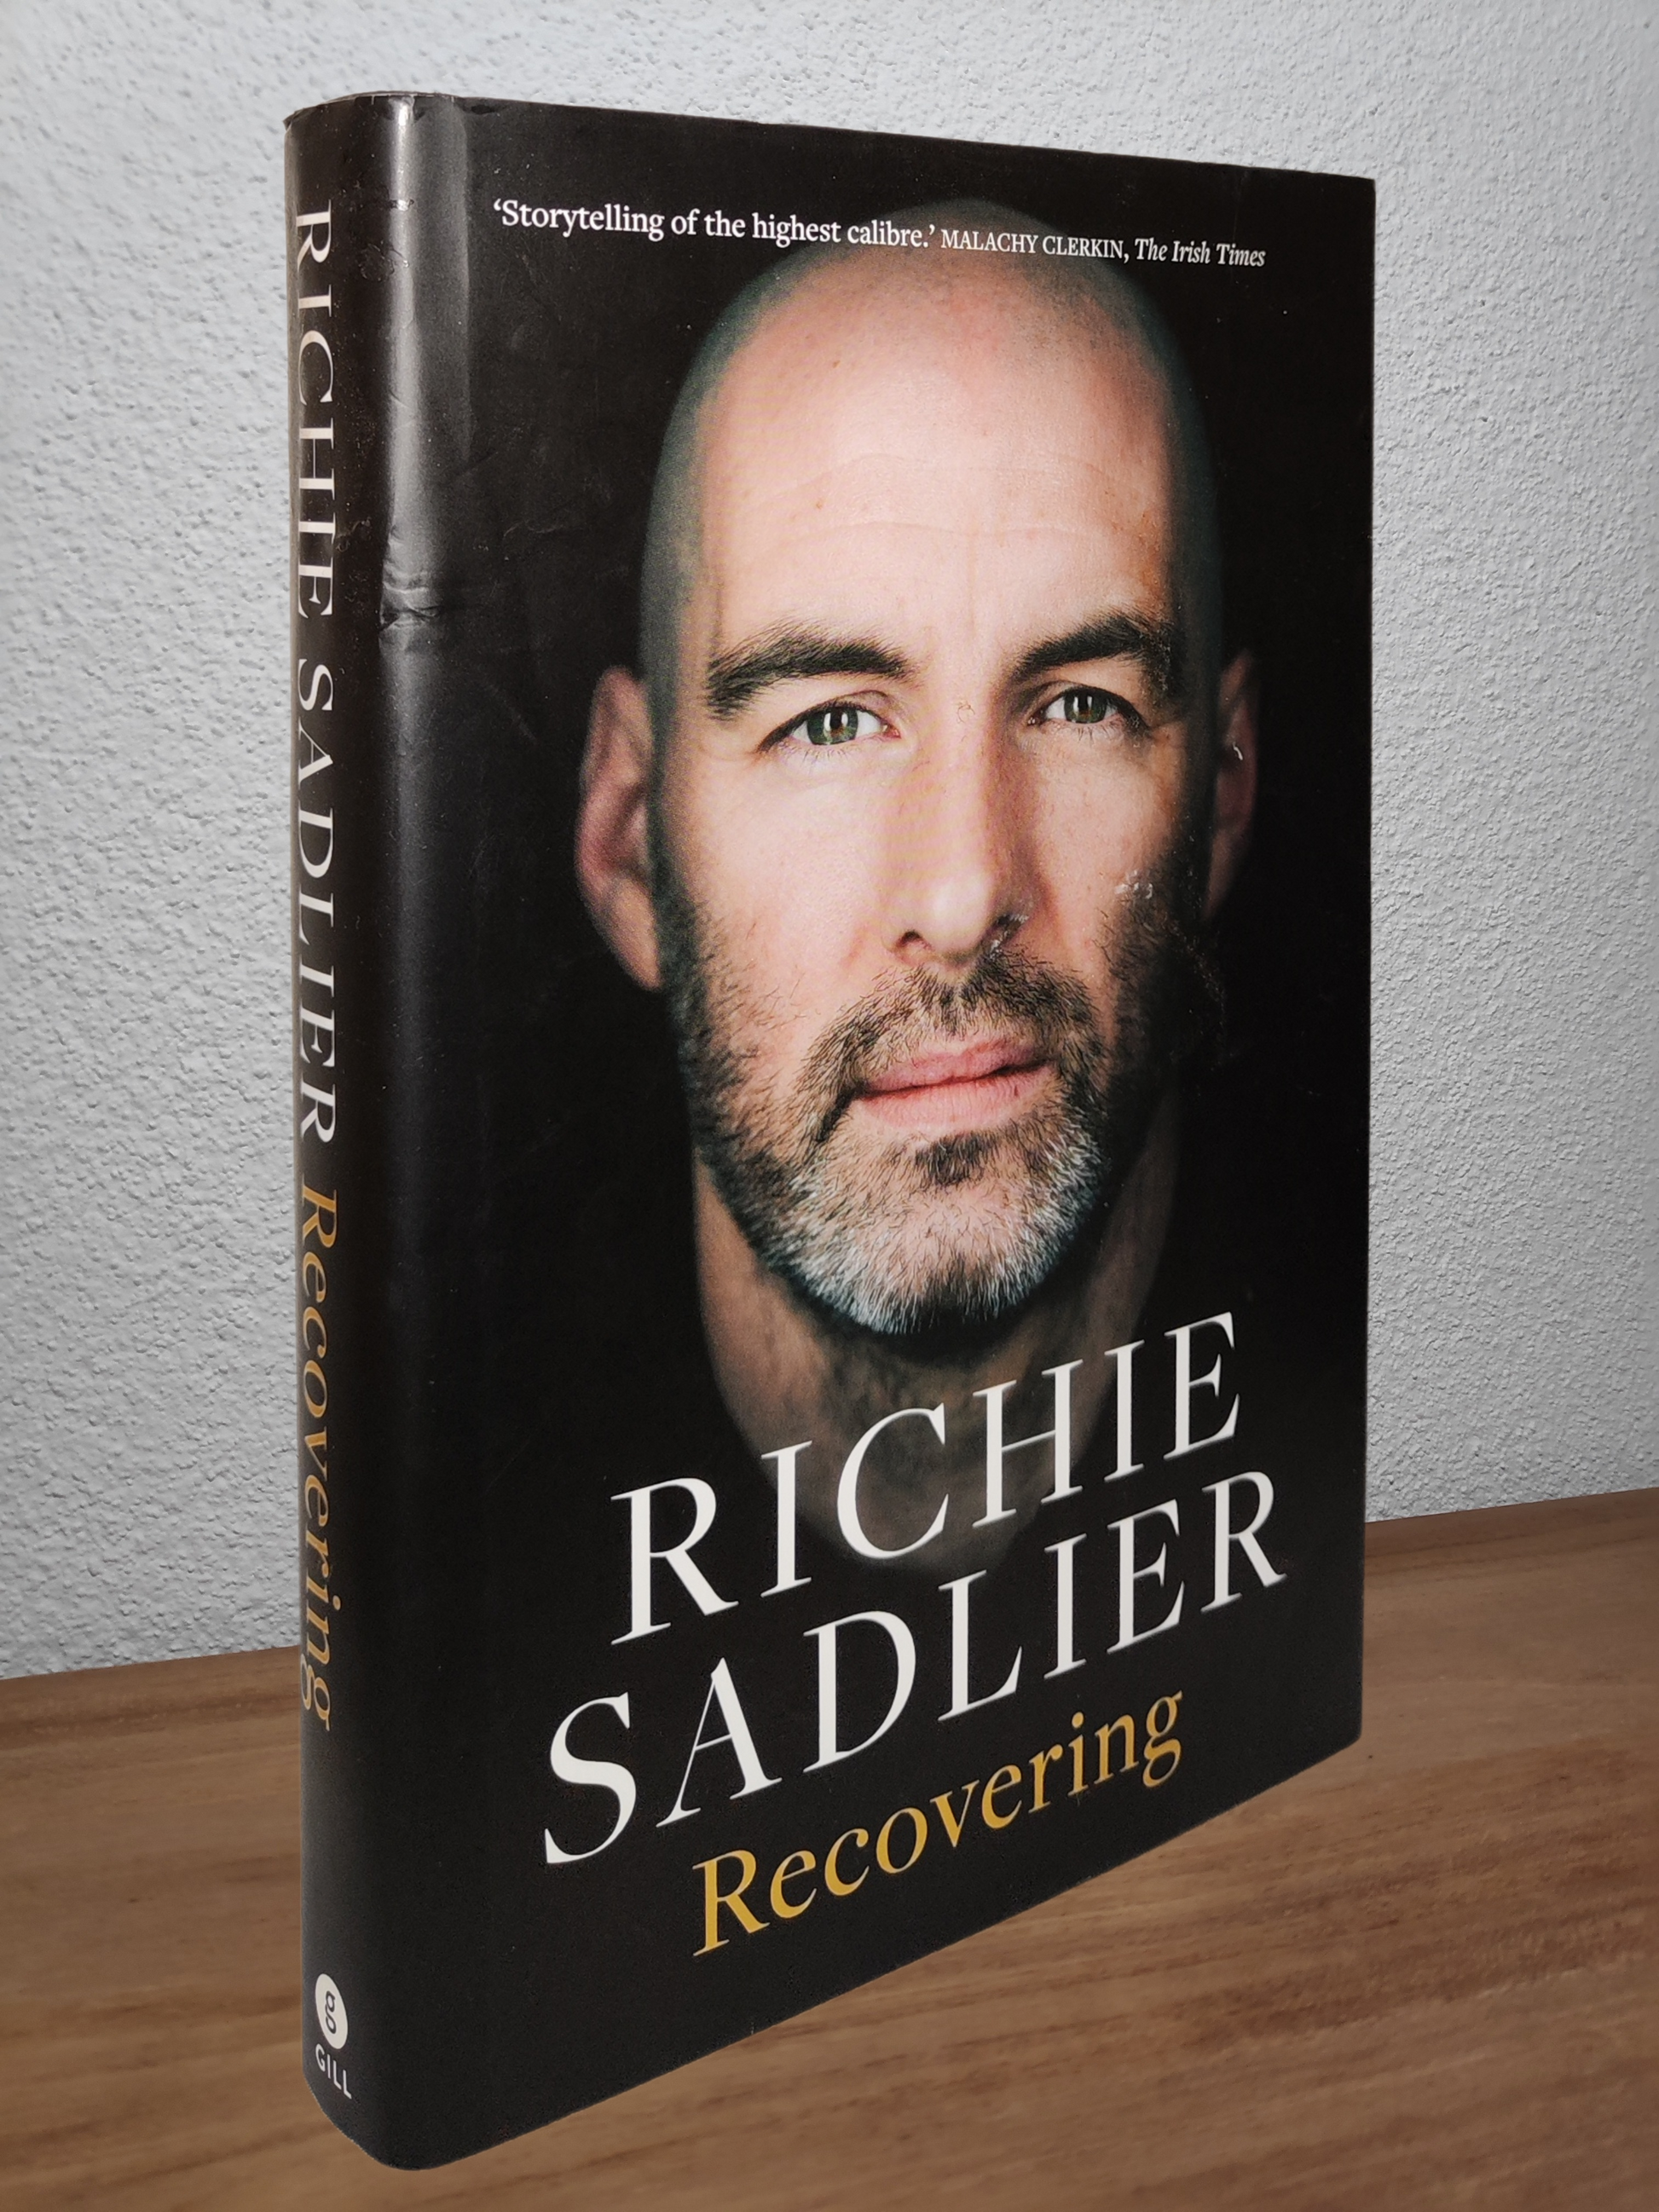 Richie Sadlier - Recovering  - Second-hand english book to deliver in Zurich & Switzerland